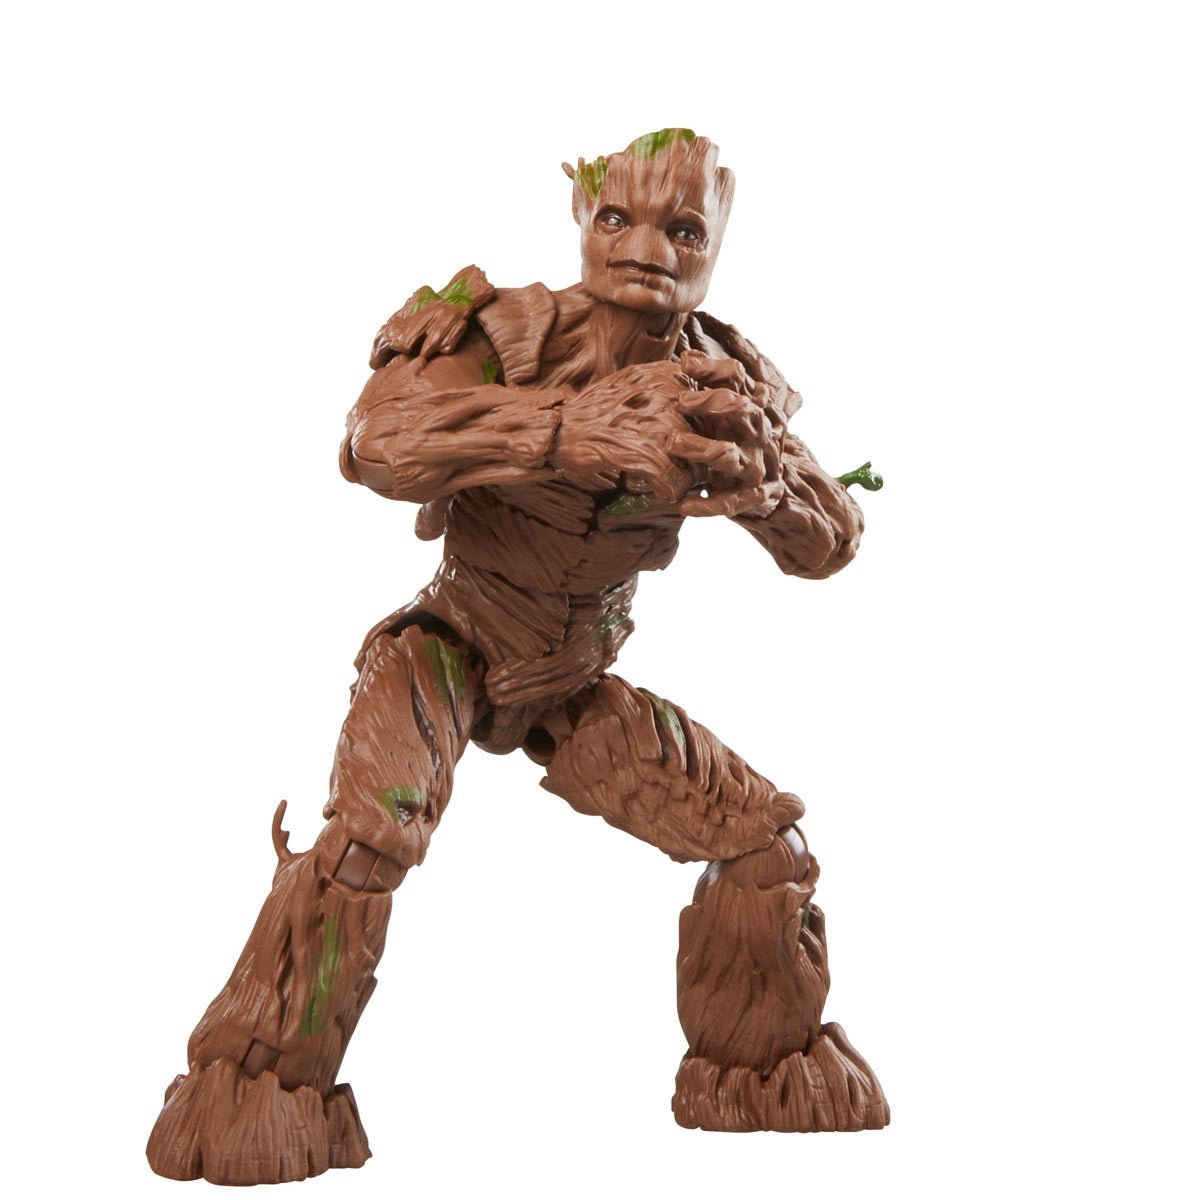 Marvel Legends Series Guardians of the Galaxy Vol.3 Deluxe Groot